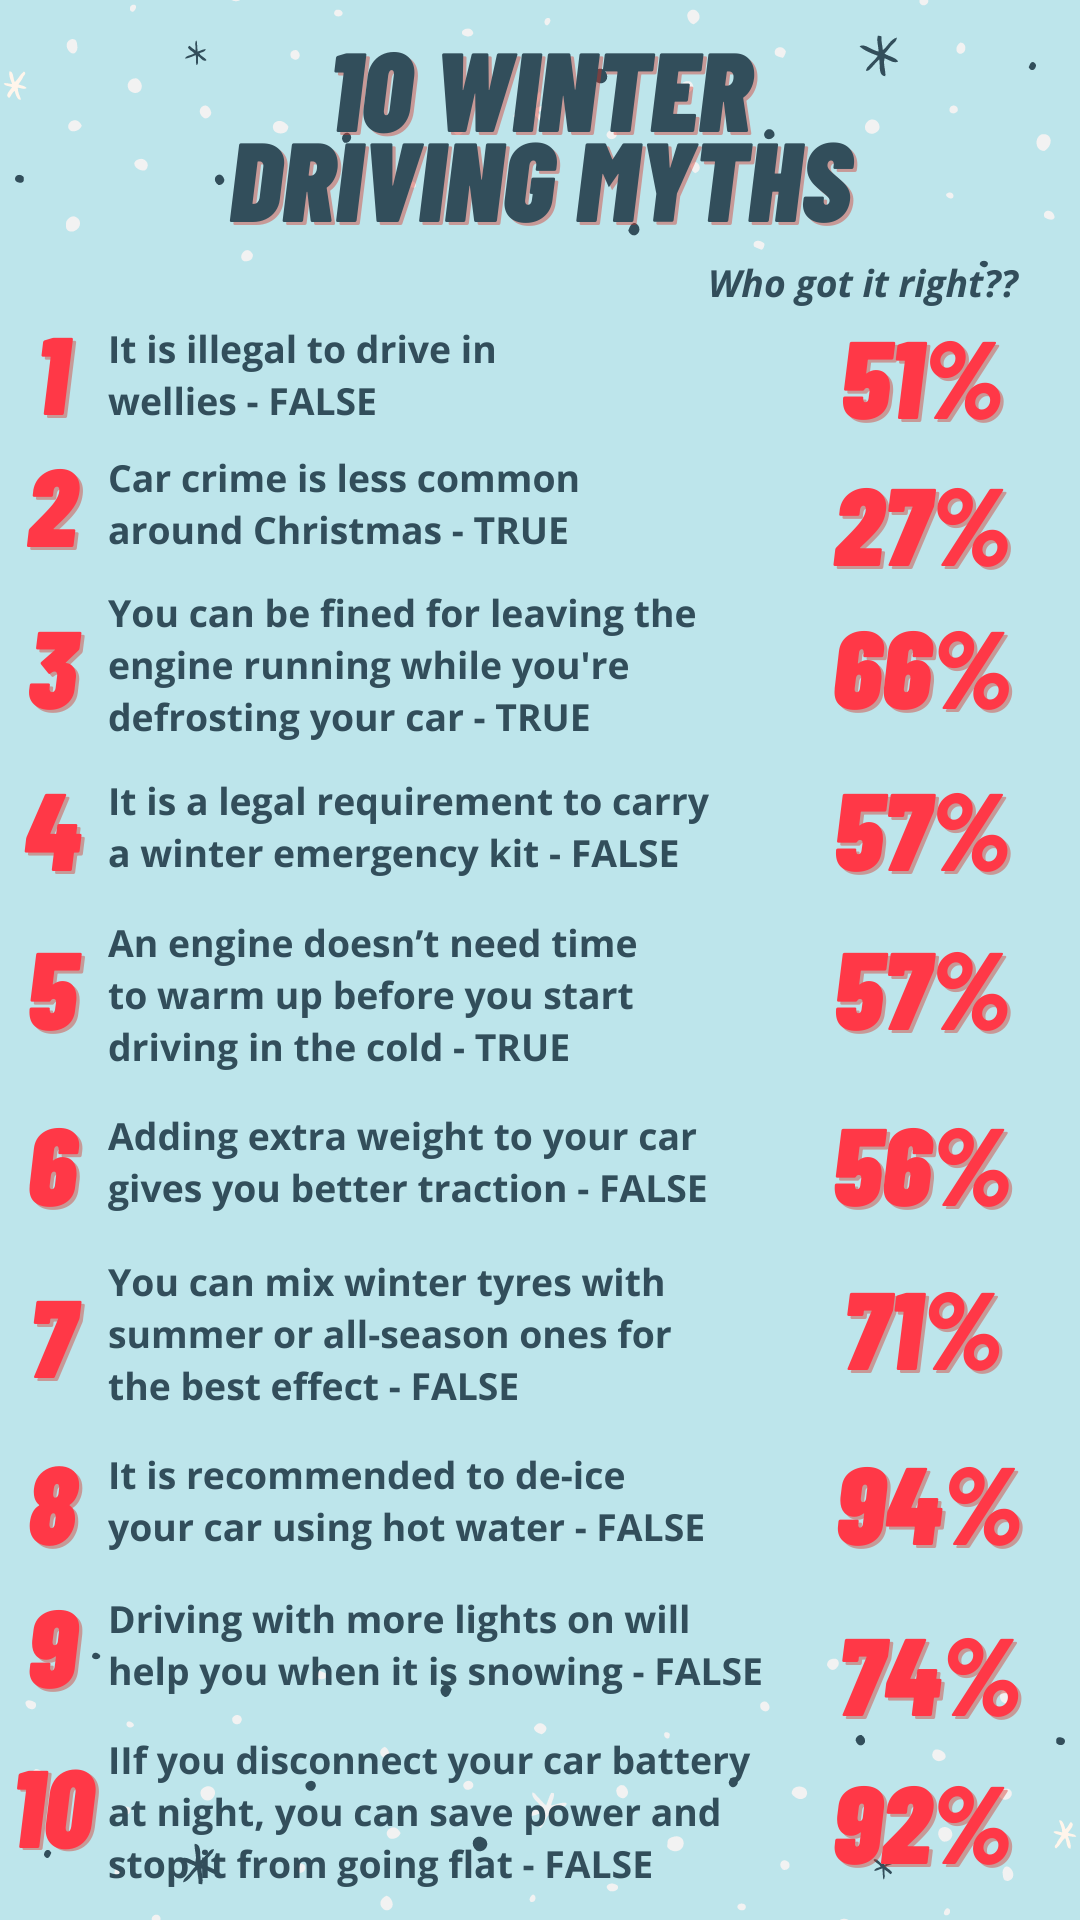 Winter driving myths from ATS